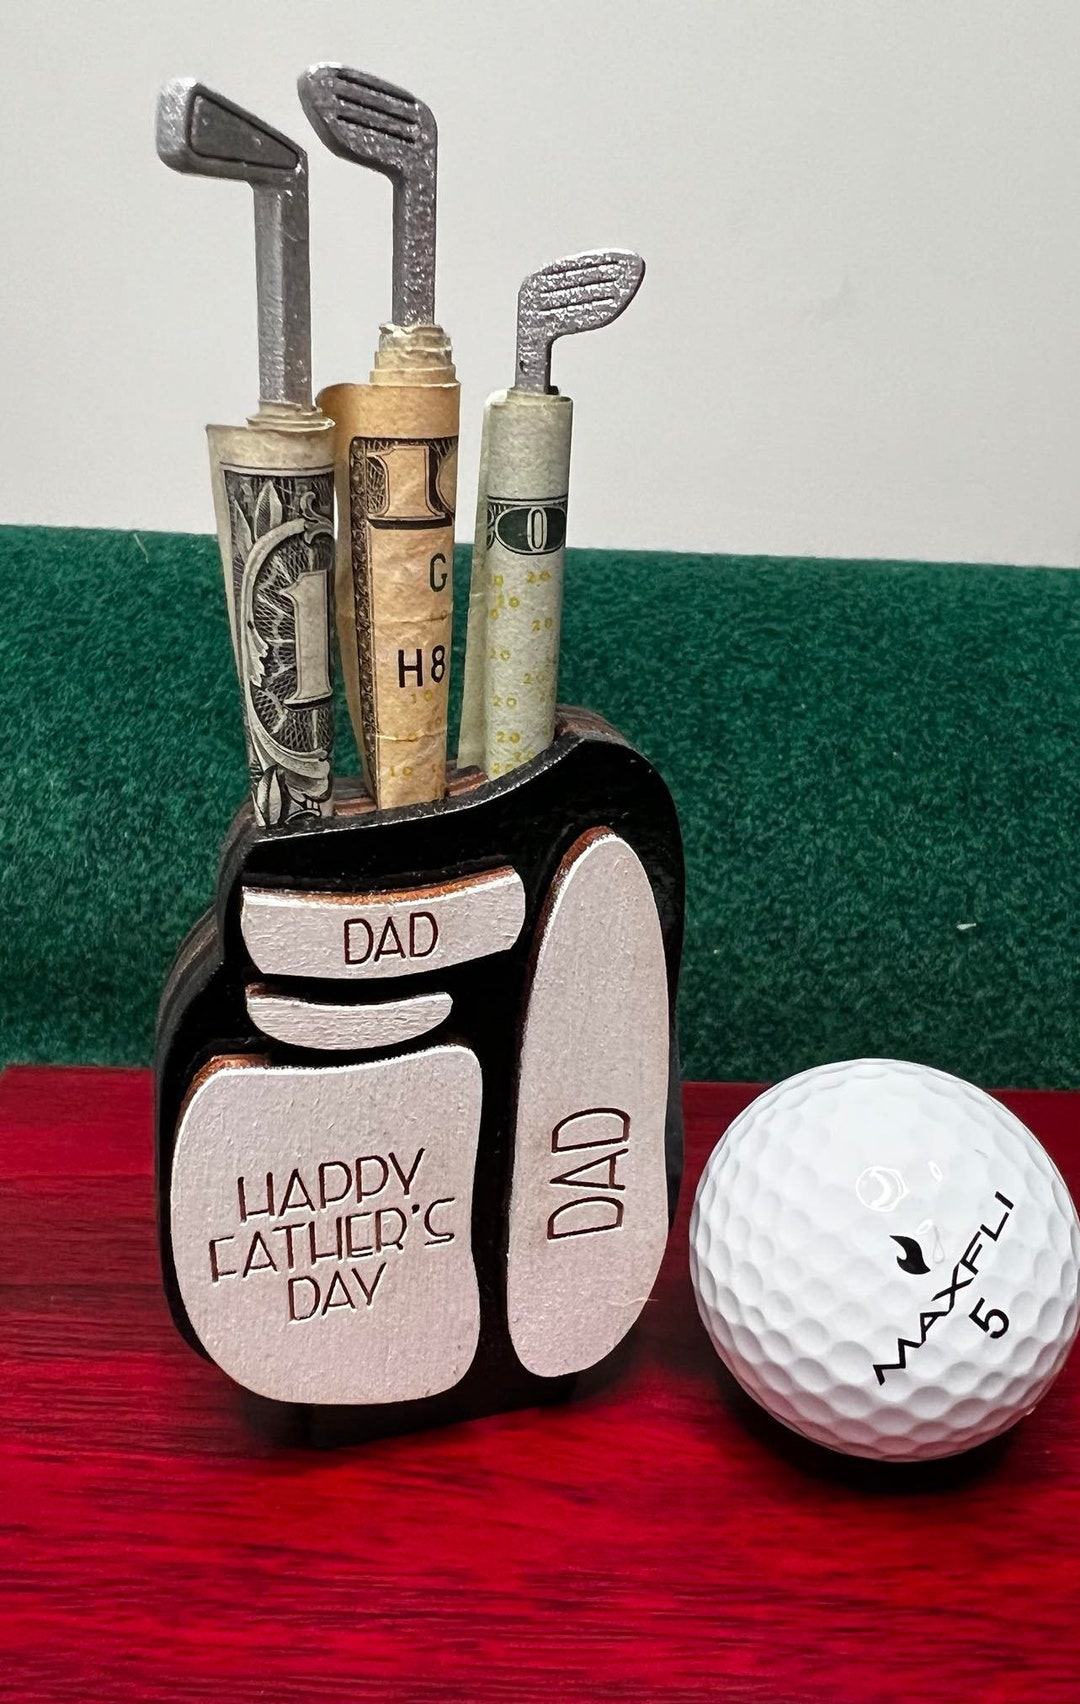  Personalized Image Golf Gift for Men Dad Husband Boss Golfer,  Custom Photo Name Golf Ball Display with Luxury Box, Golf Accessories for  Men, Funny Golf Gift for Men, Anniversary, Birthday, Christmas 